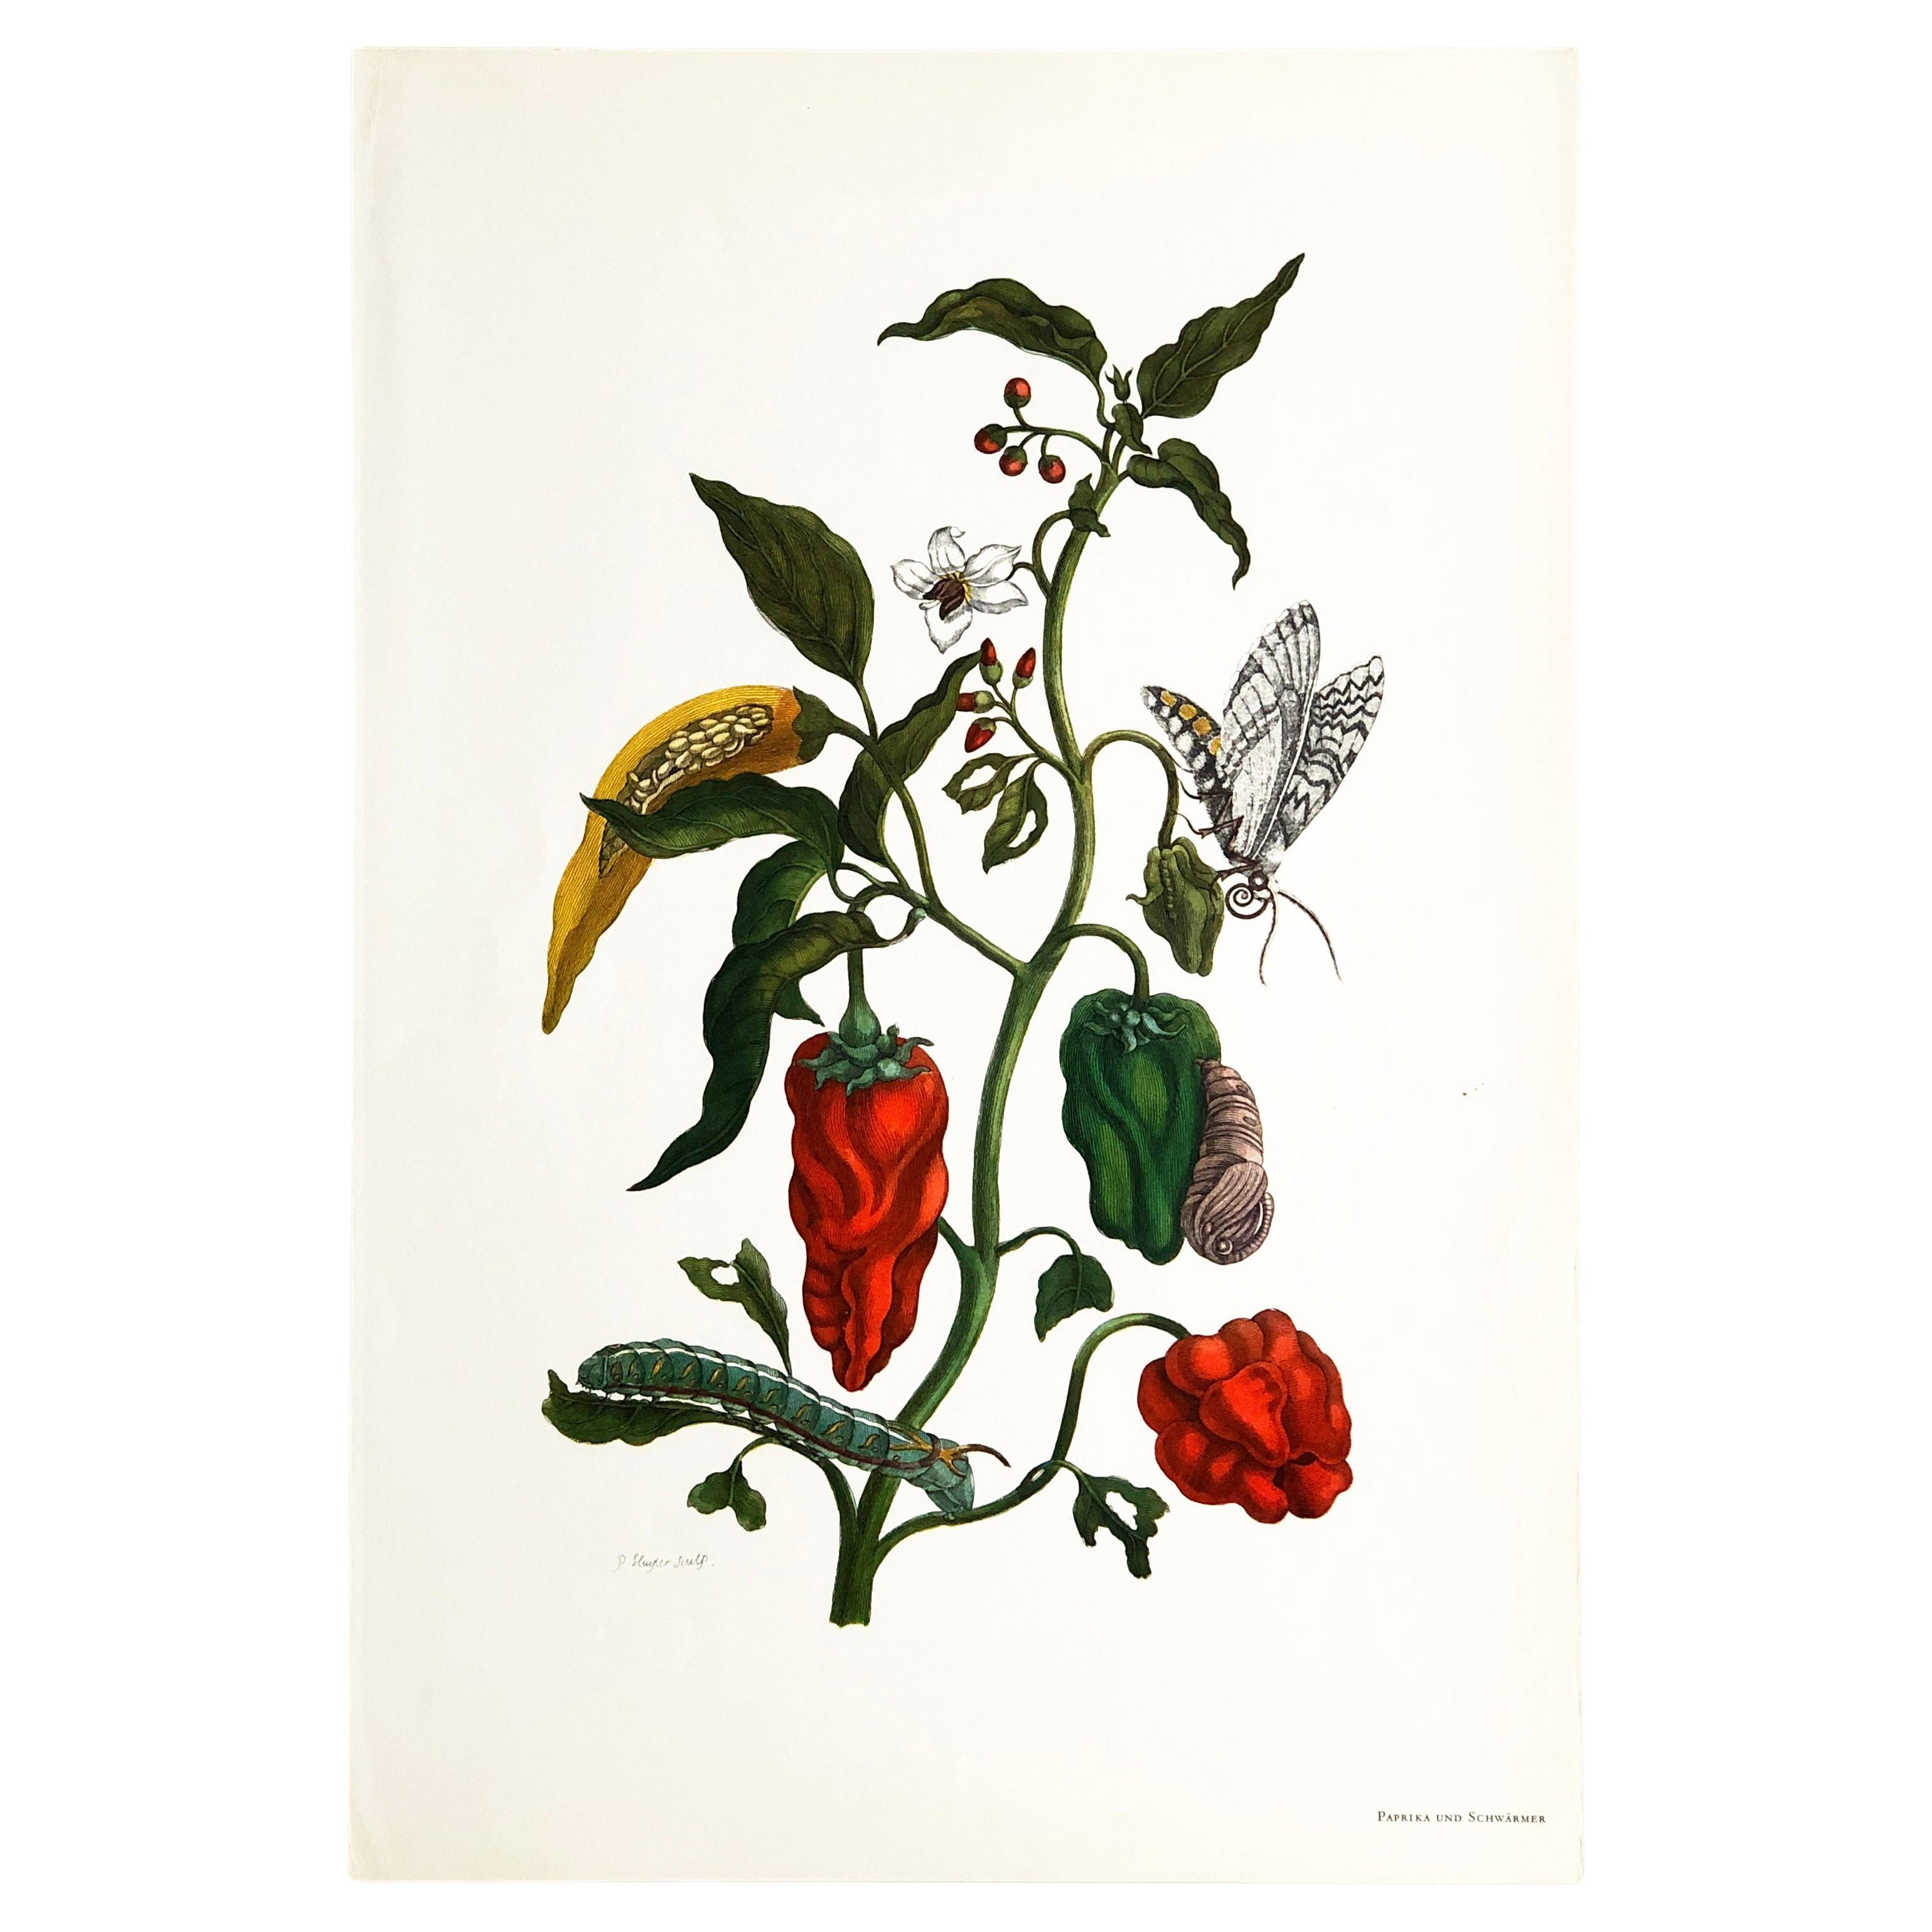 Maria Sibylla Merian - P. Sluyter - Peppers and Hawkmoths Nr. 55 For Sale